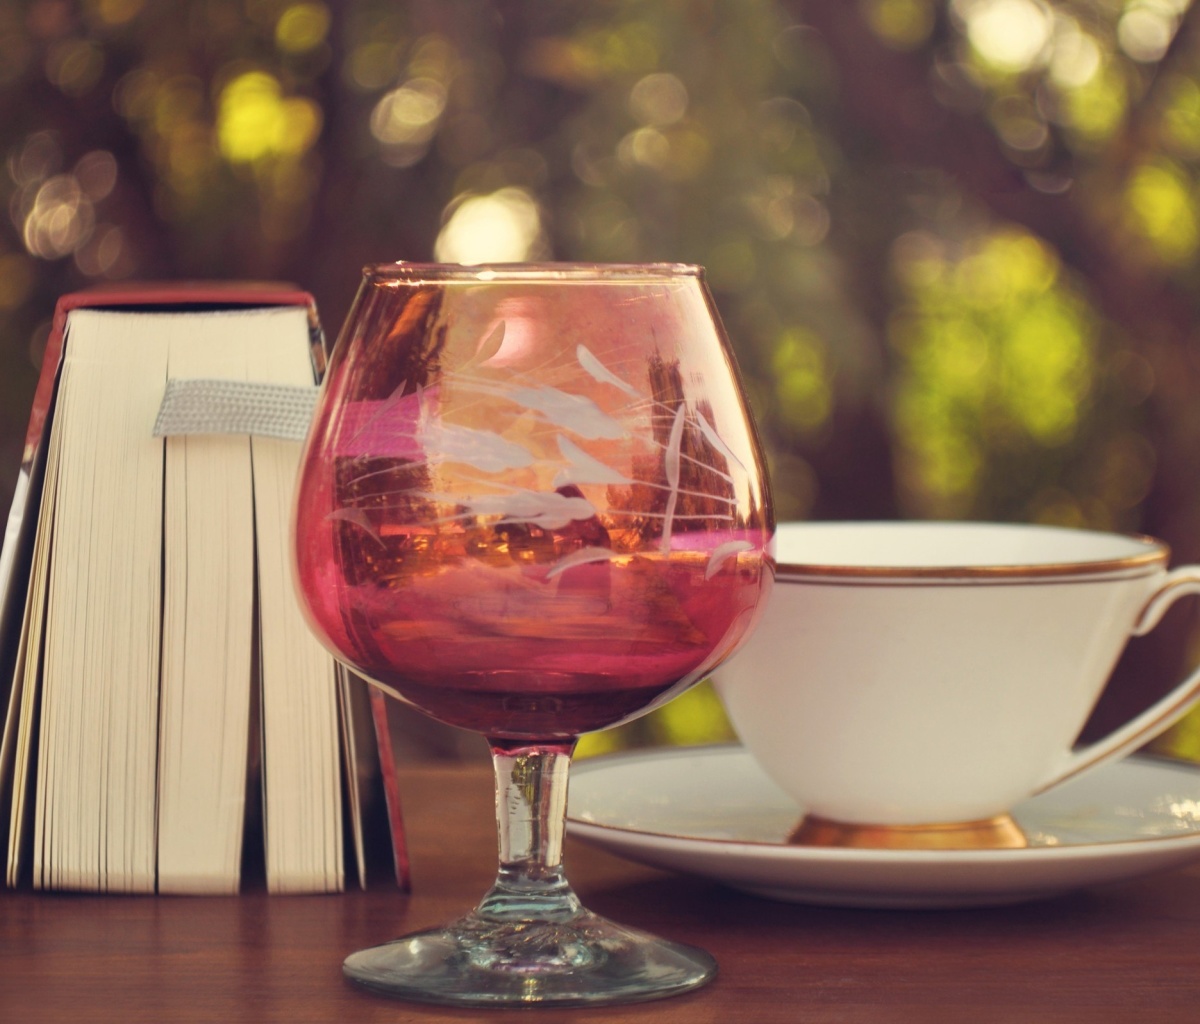 Perfect day with wine and book screenshot #1 1200x1024